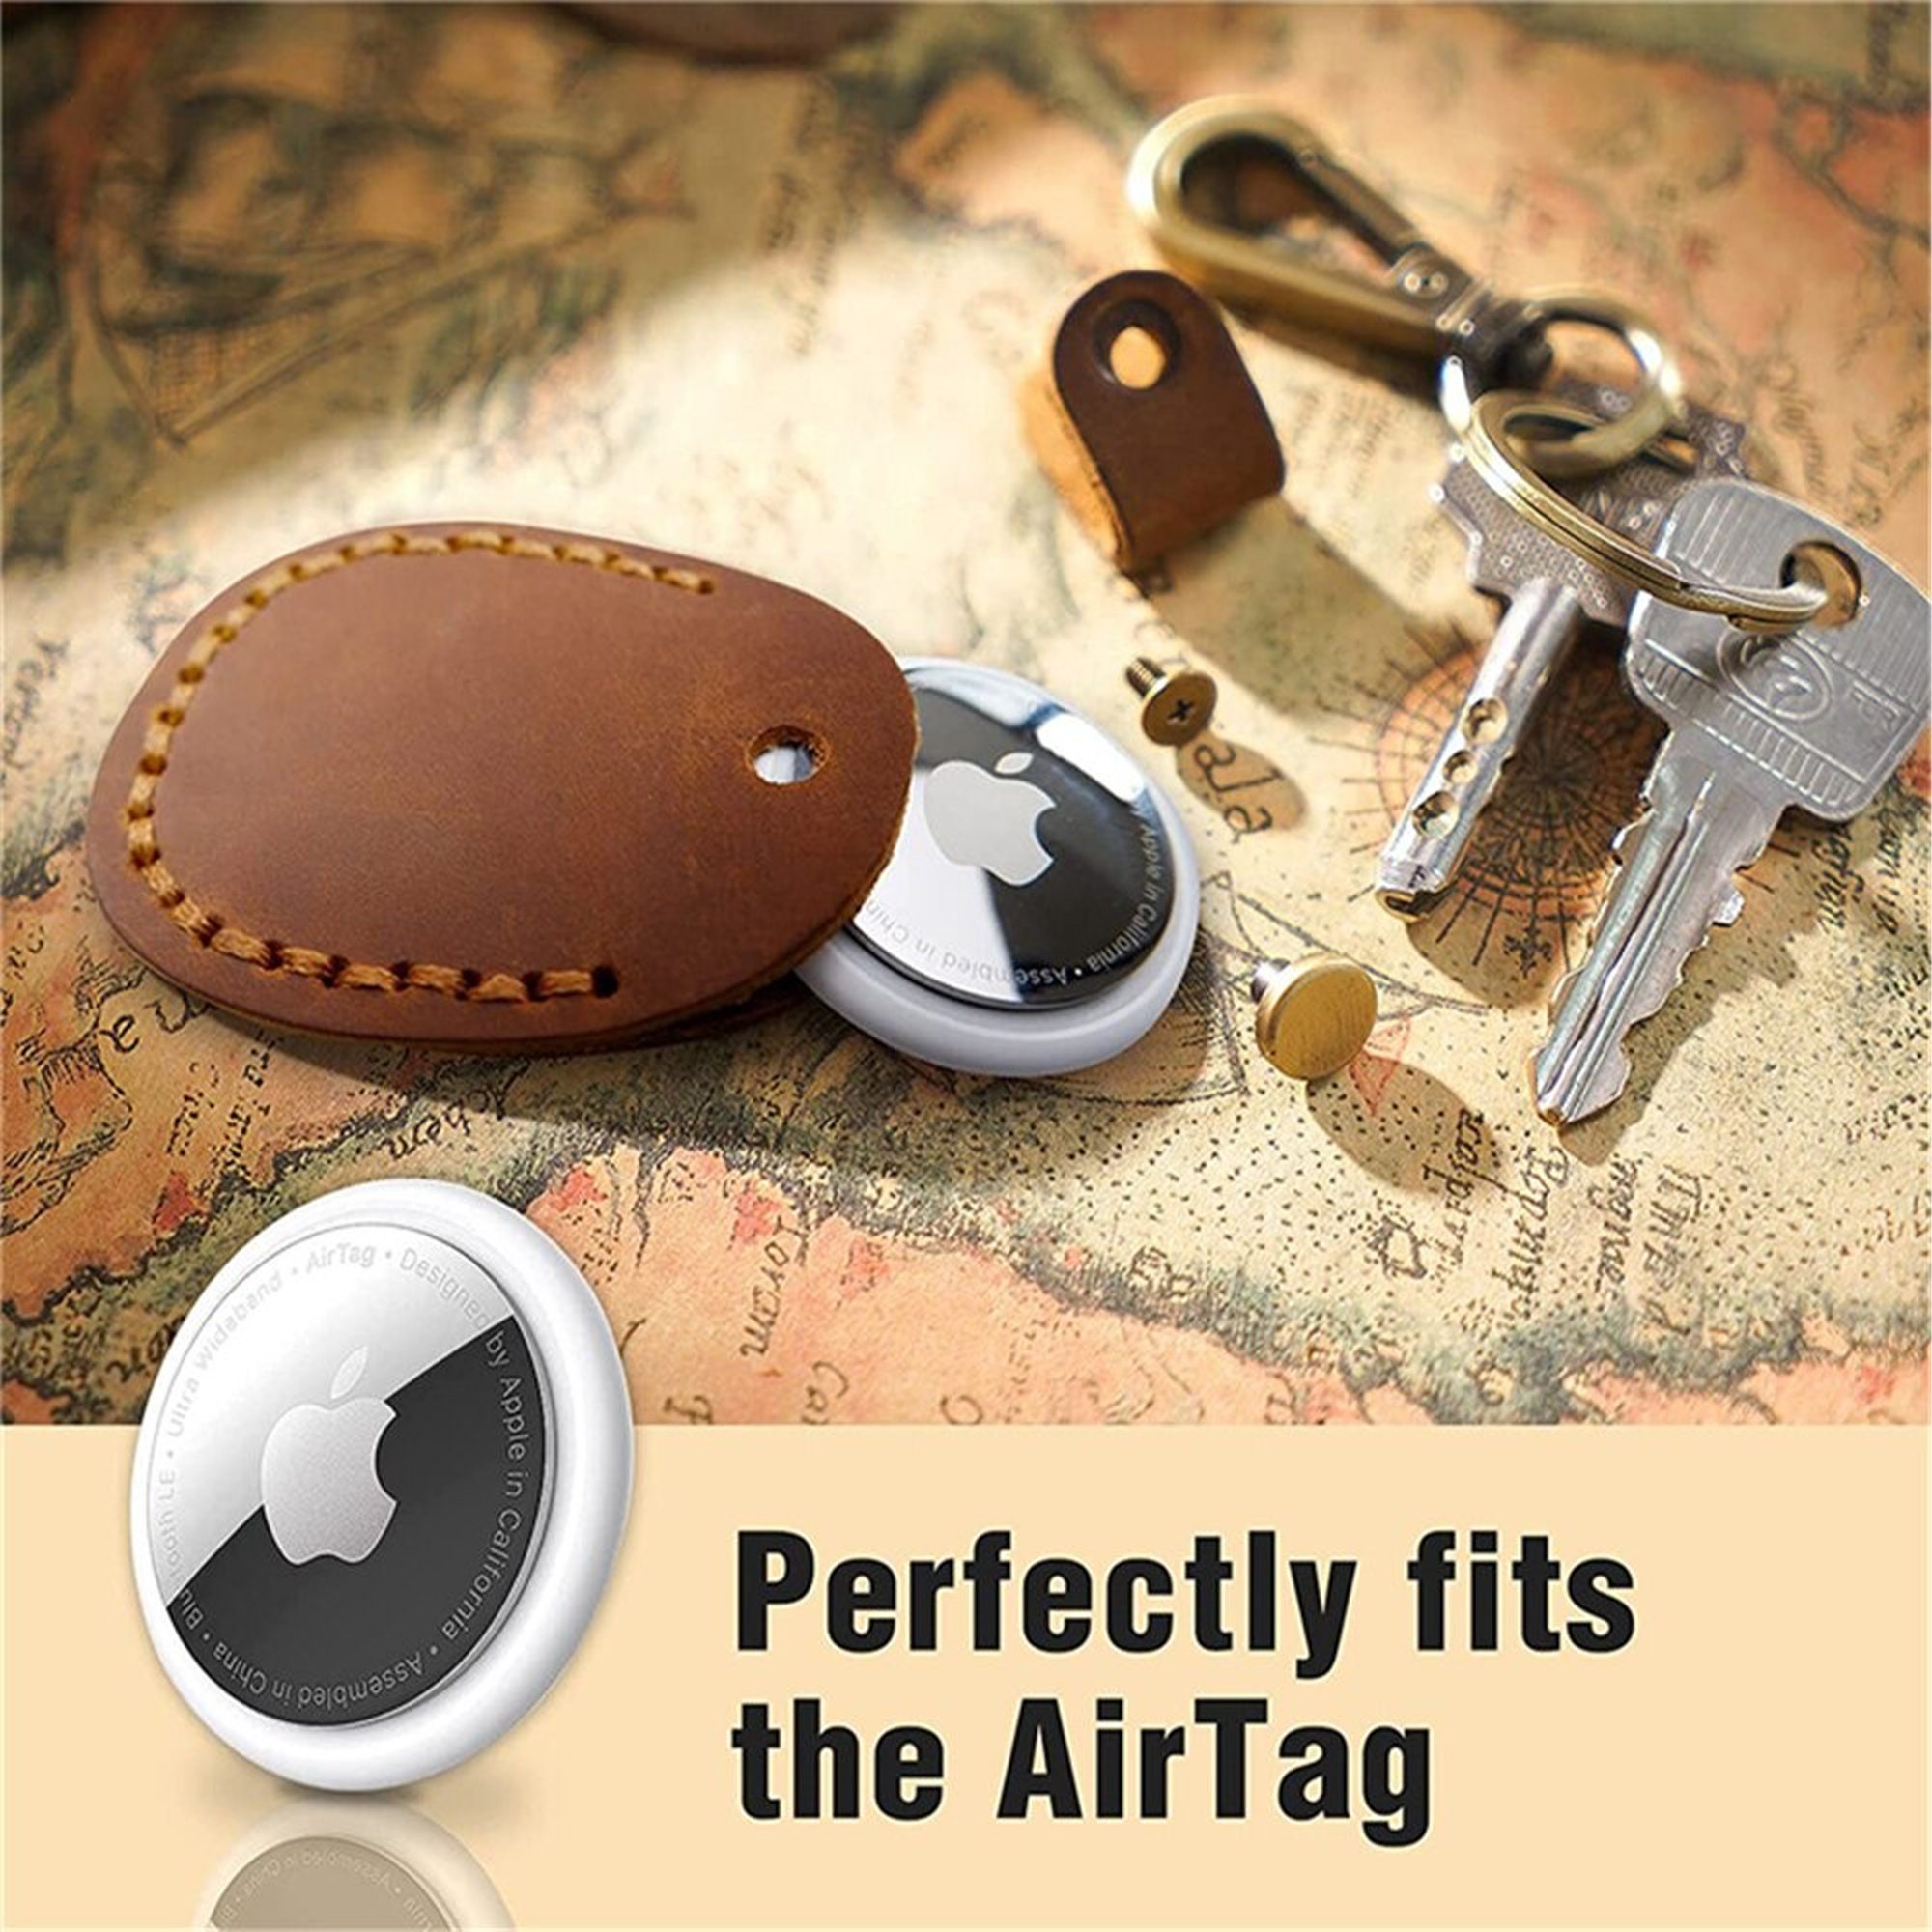 MOLOVA Airtag Keychain Leather Air Tag Holder, [2 Pack] Protective Tracker  Case with Key Ring Tags Chain, Apple Airtags Cases Cover GPS Item Finders